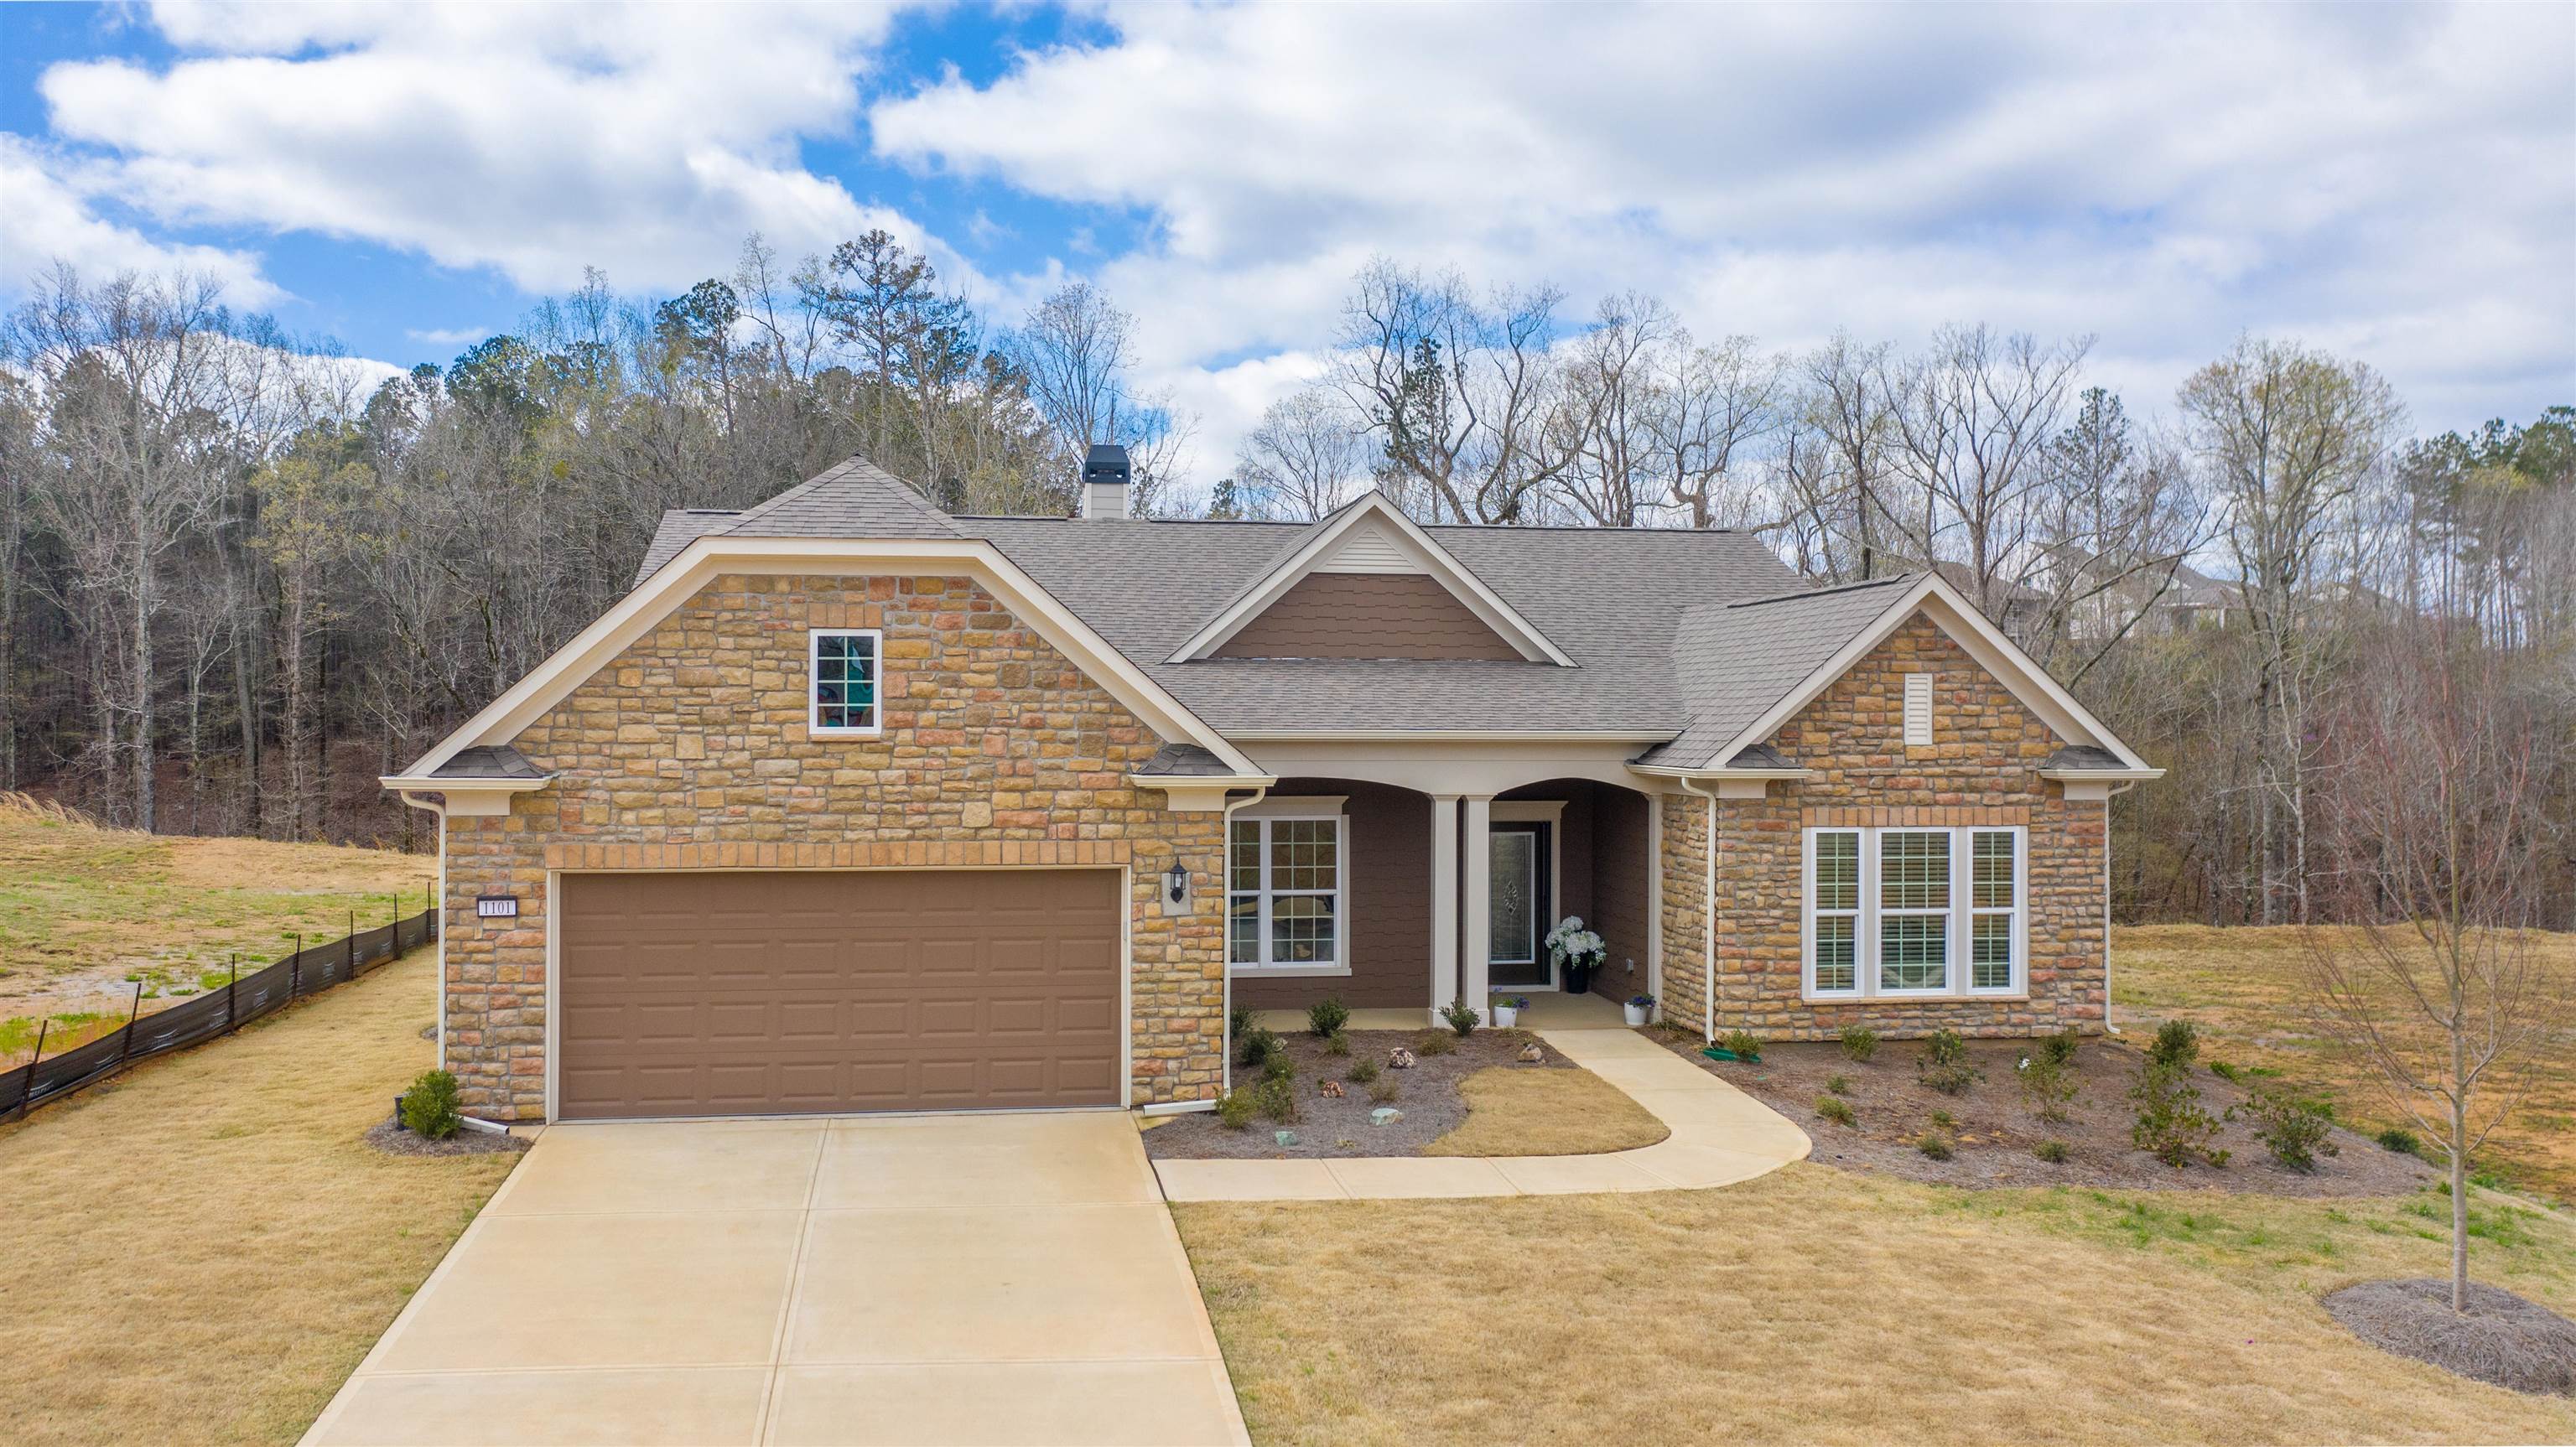 Beautifully Decorated Custom Built Home in the Del Webb community at Lake Oconee. This home is the Dunwoody plan and was purchased new in July, 2021. Some of the many upgraded features include the 4' garage extension, dual owner's suite, fireplace in the gathering room, master zero entry shower accessible for wheelchair, gorgeous sunroom, screened back porch, water softening system, full yard irrigation, under kitchen cabinet lighting and fans installed in the kitchen, gathering room, sunroom, bedroom, study and porch. A custom glass insert was installed in the front door and a retractable screen door was installed. Many additional upgrades were selected at the design center including upgraded stone, flooring, tile, paint, 5" baseboards and window casing to name a few.  Enjoy new home living without the wait of building.